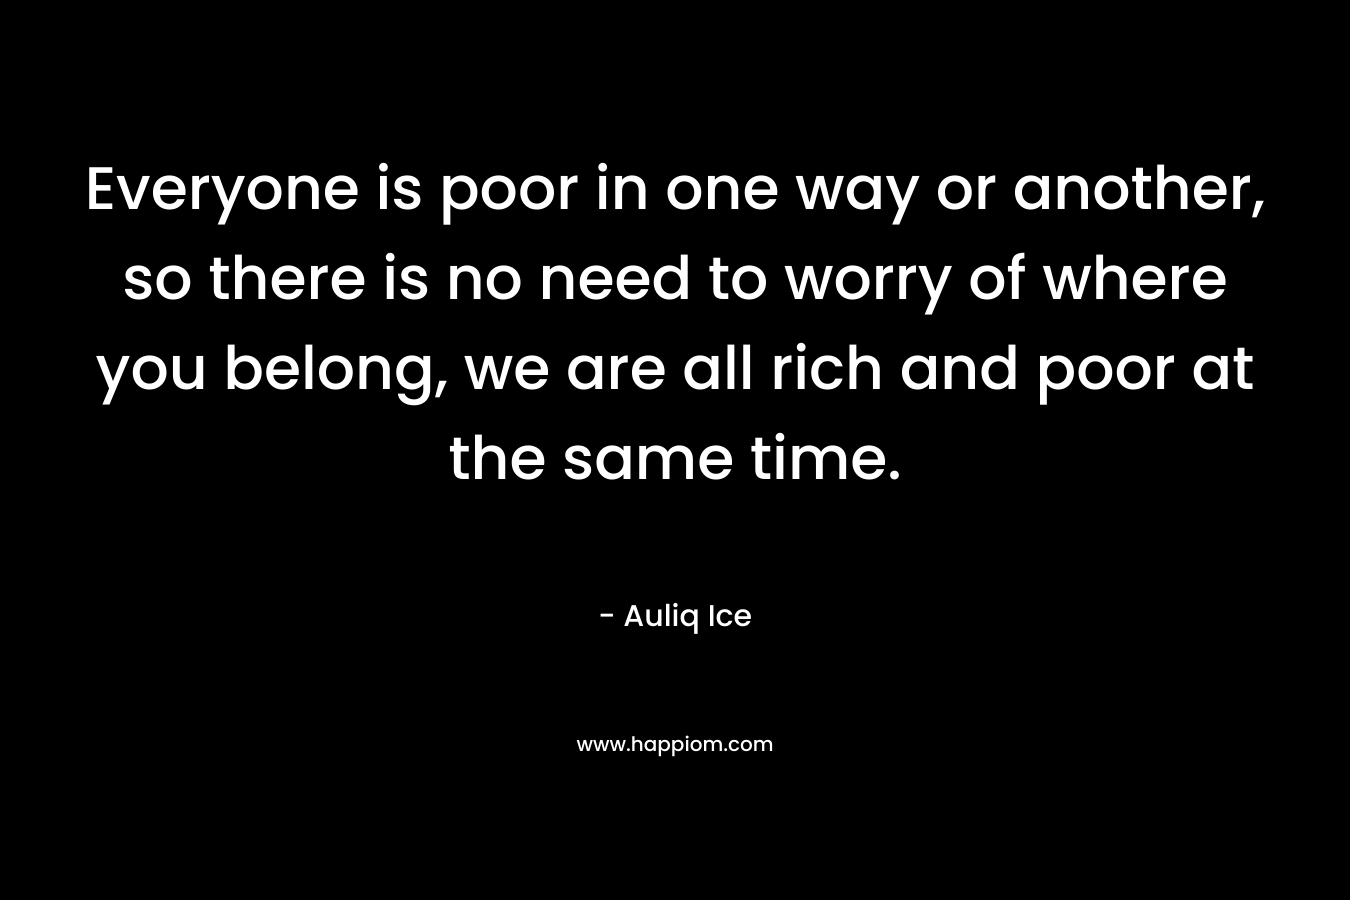 Everyone is poor in one way or another, so there is no need to worry of where you belong, we are all rich and poor at the same time.